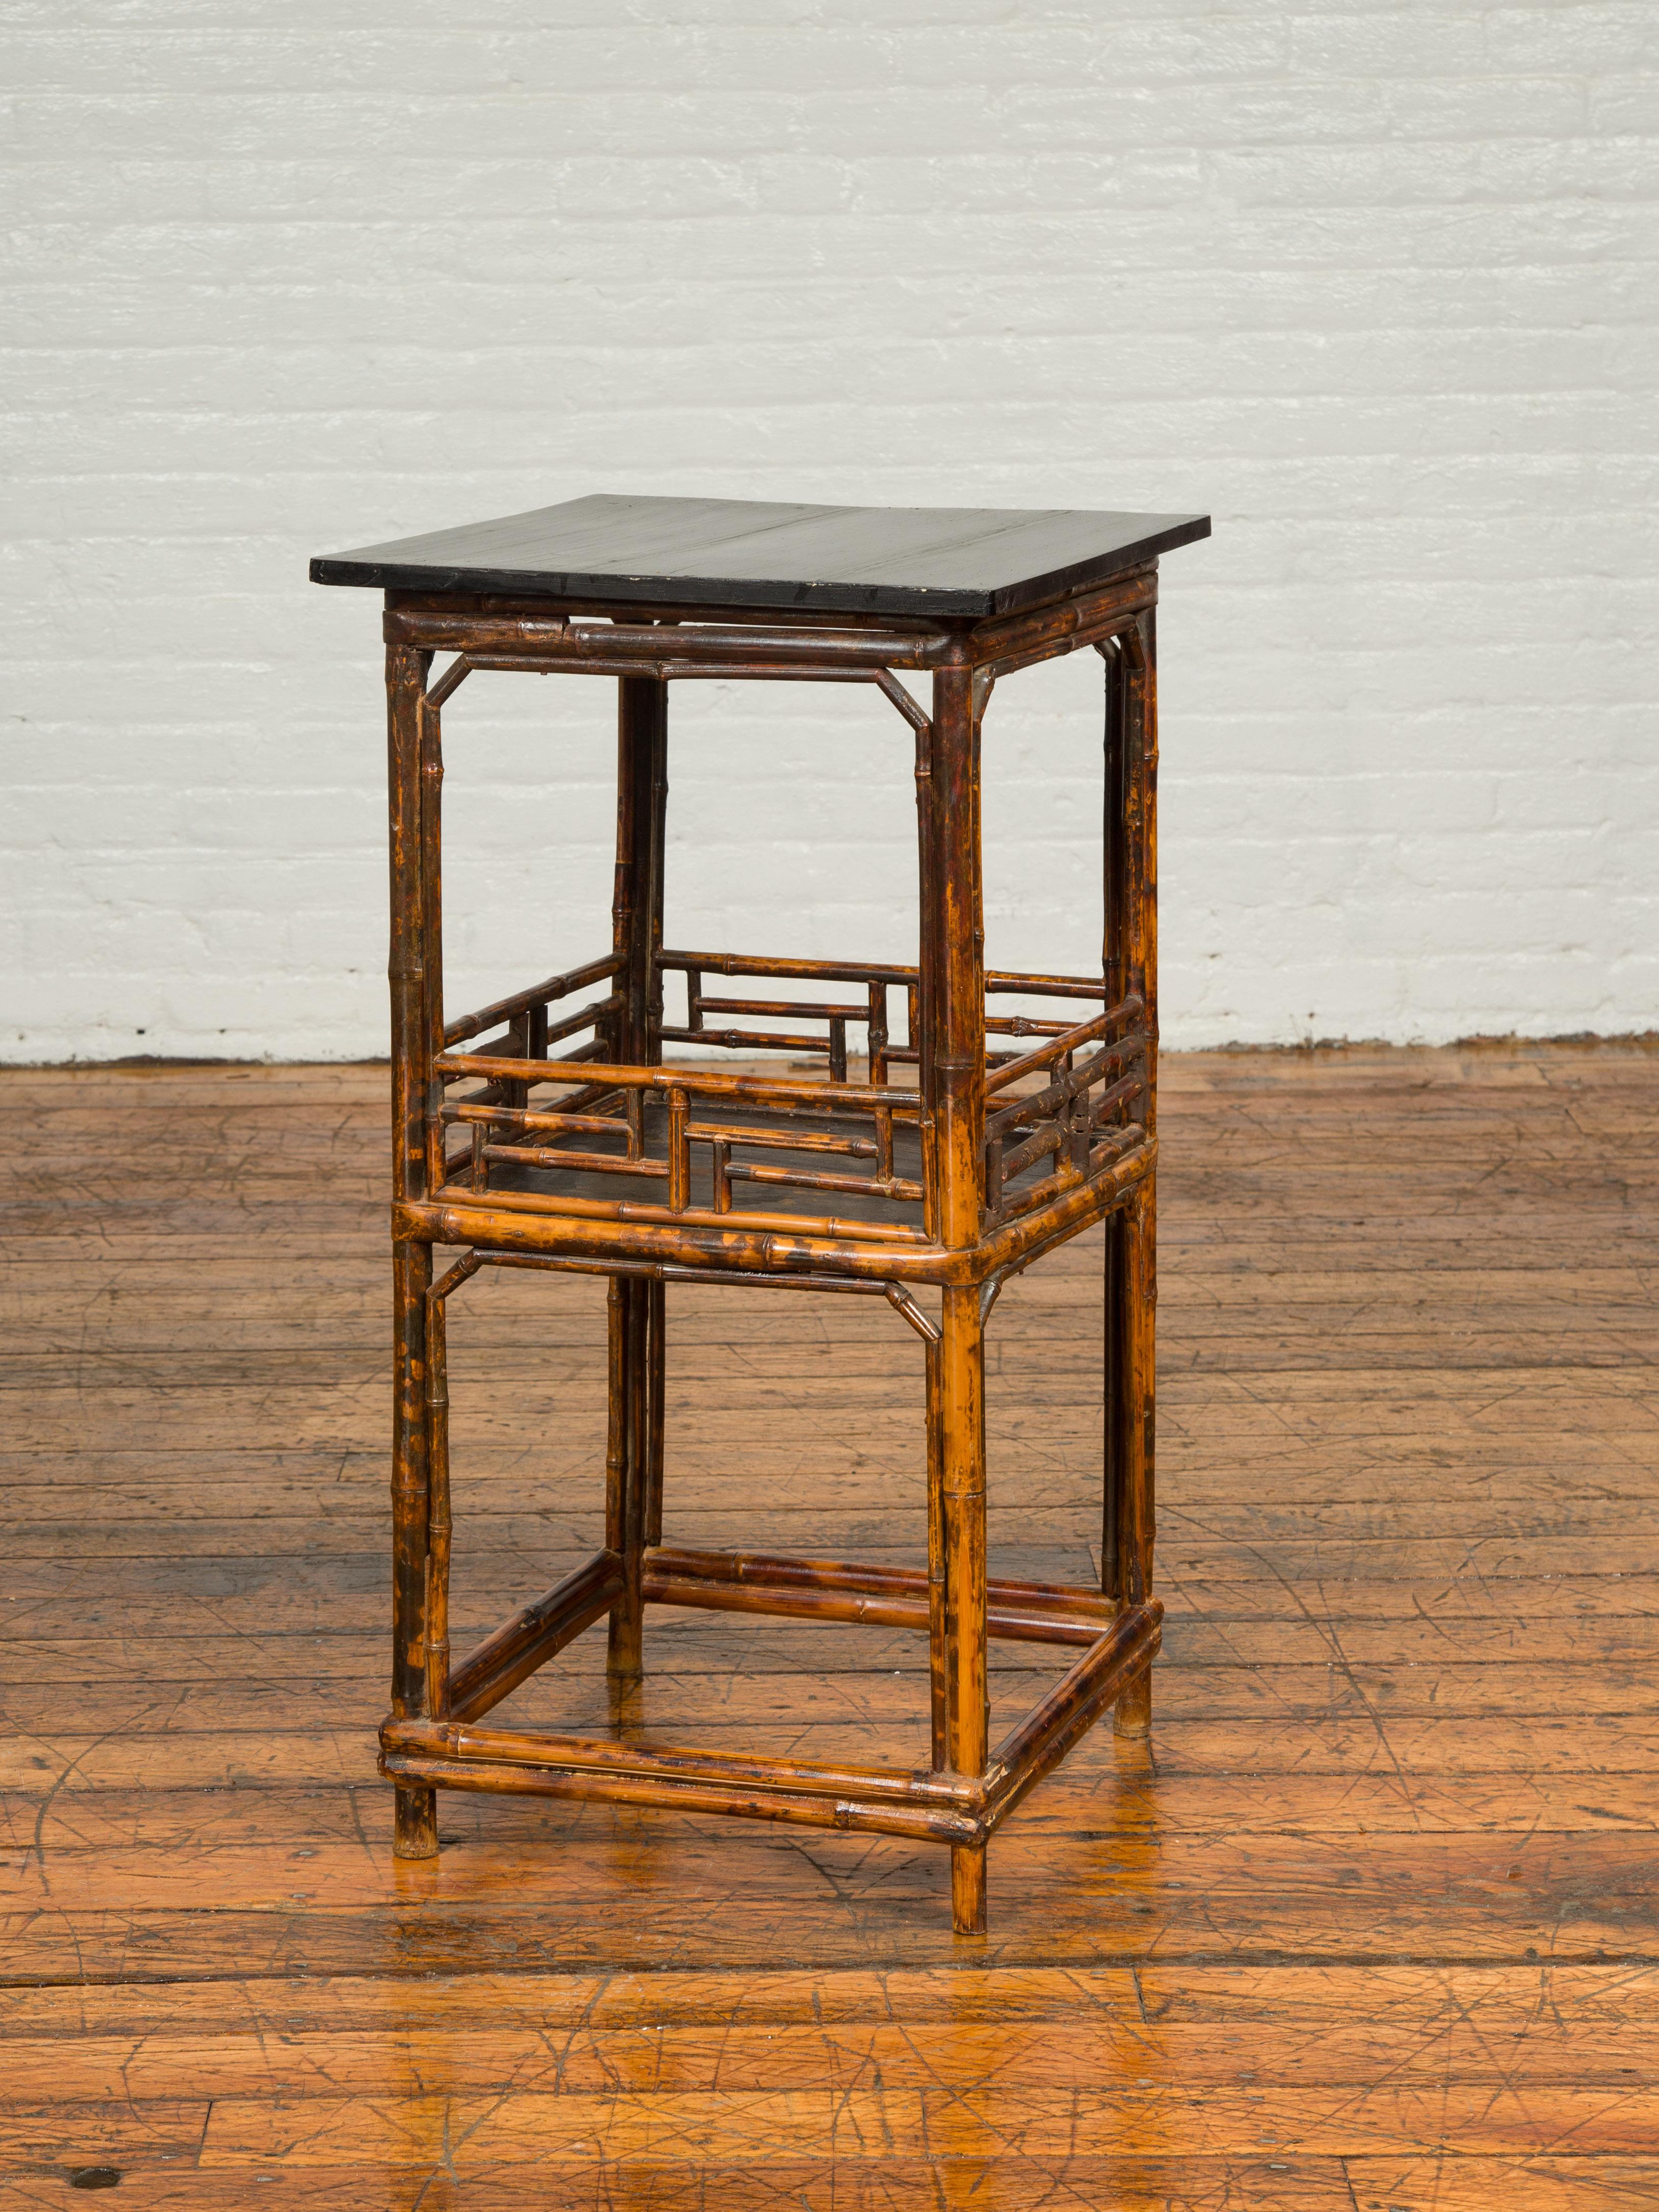 20th Century Chinese Antique Bamboo Lamp Table with Shelf, Geometric Patterns and Black Top